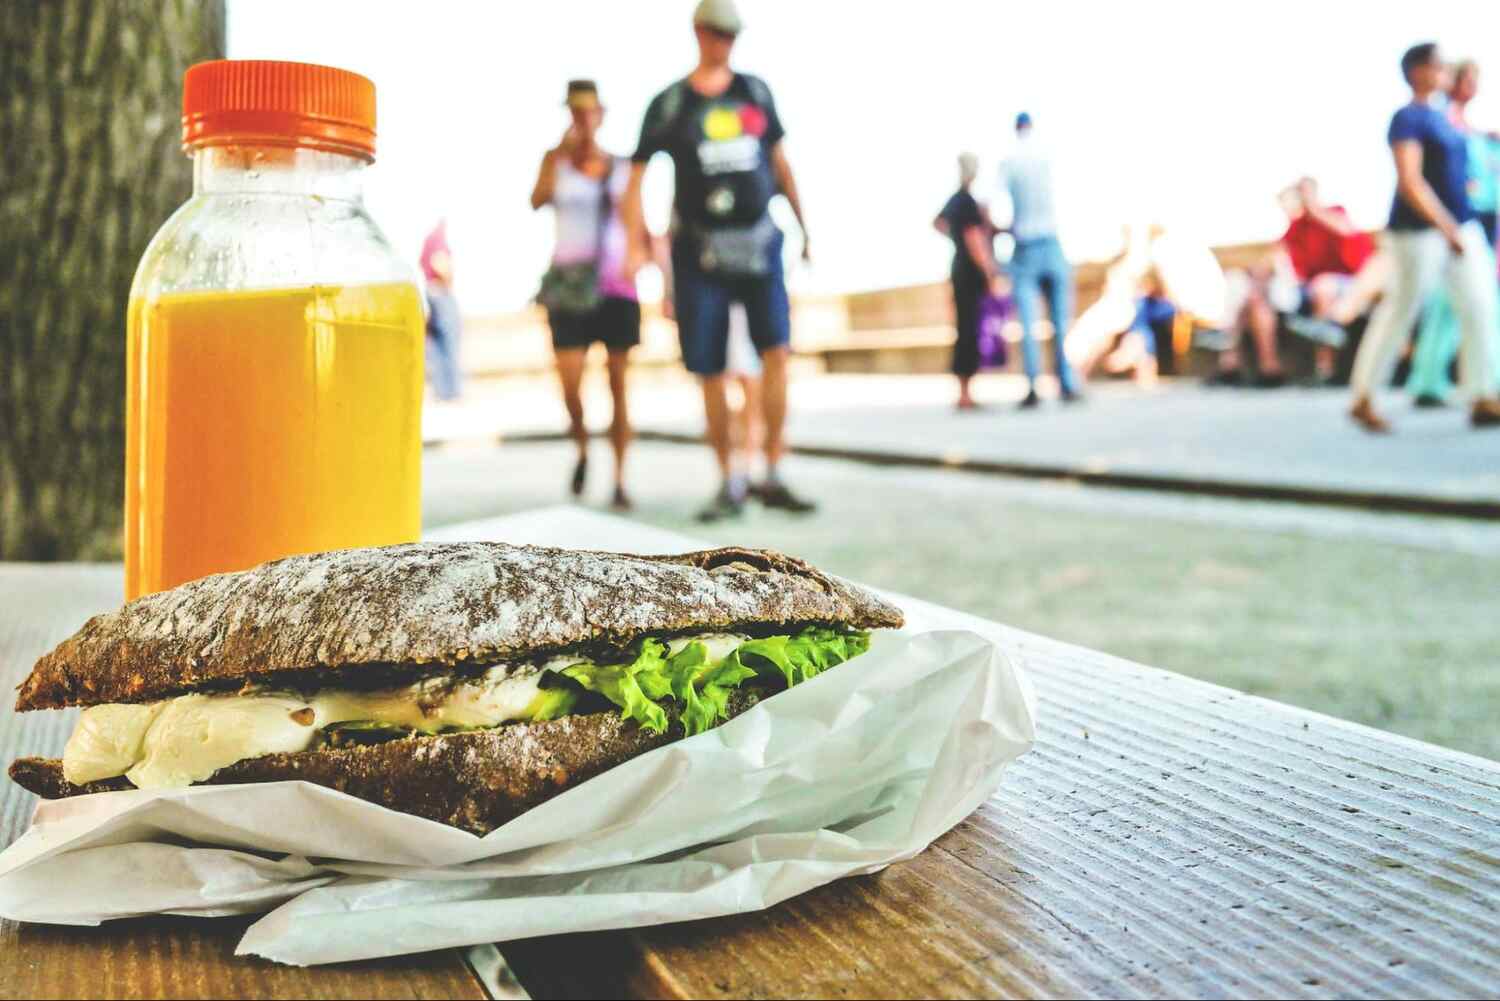 A sandwich and bottle of orange juice on a table